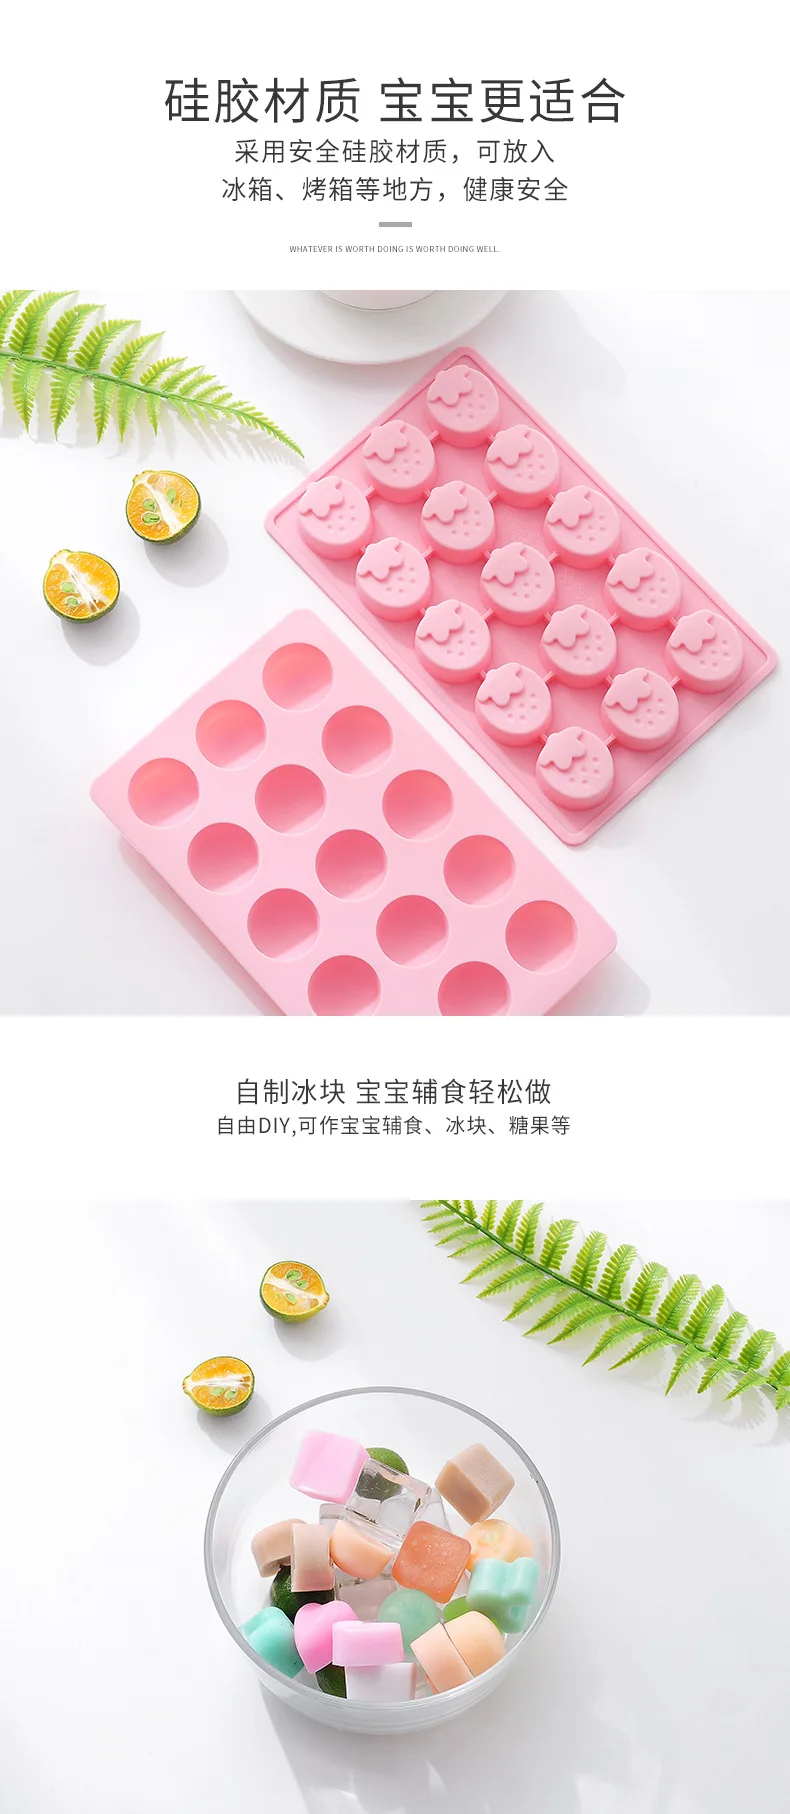 Silicone Ice Cube Trays, Reusable Chocolate Molds Candy Molds